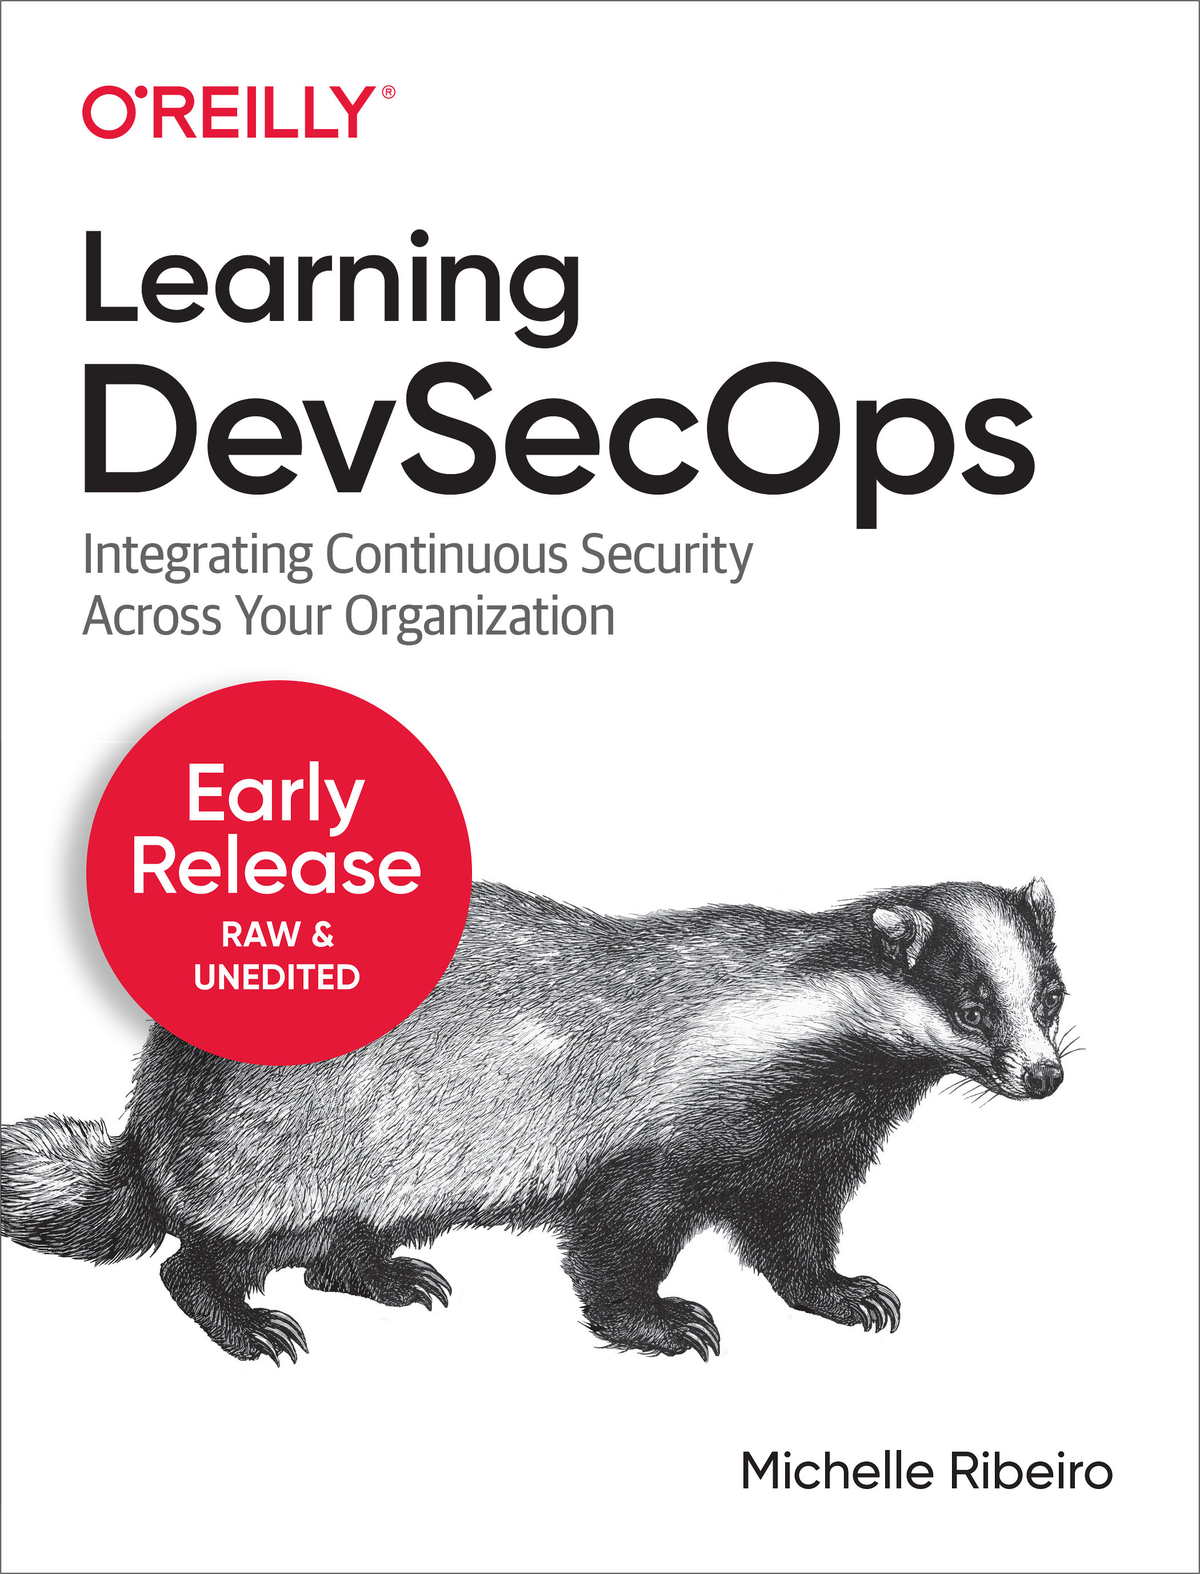 Learning DevSecOps by Michelle Ribeiro Copyright 2021 SPIRITSEC All rights - photo 1